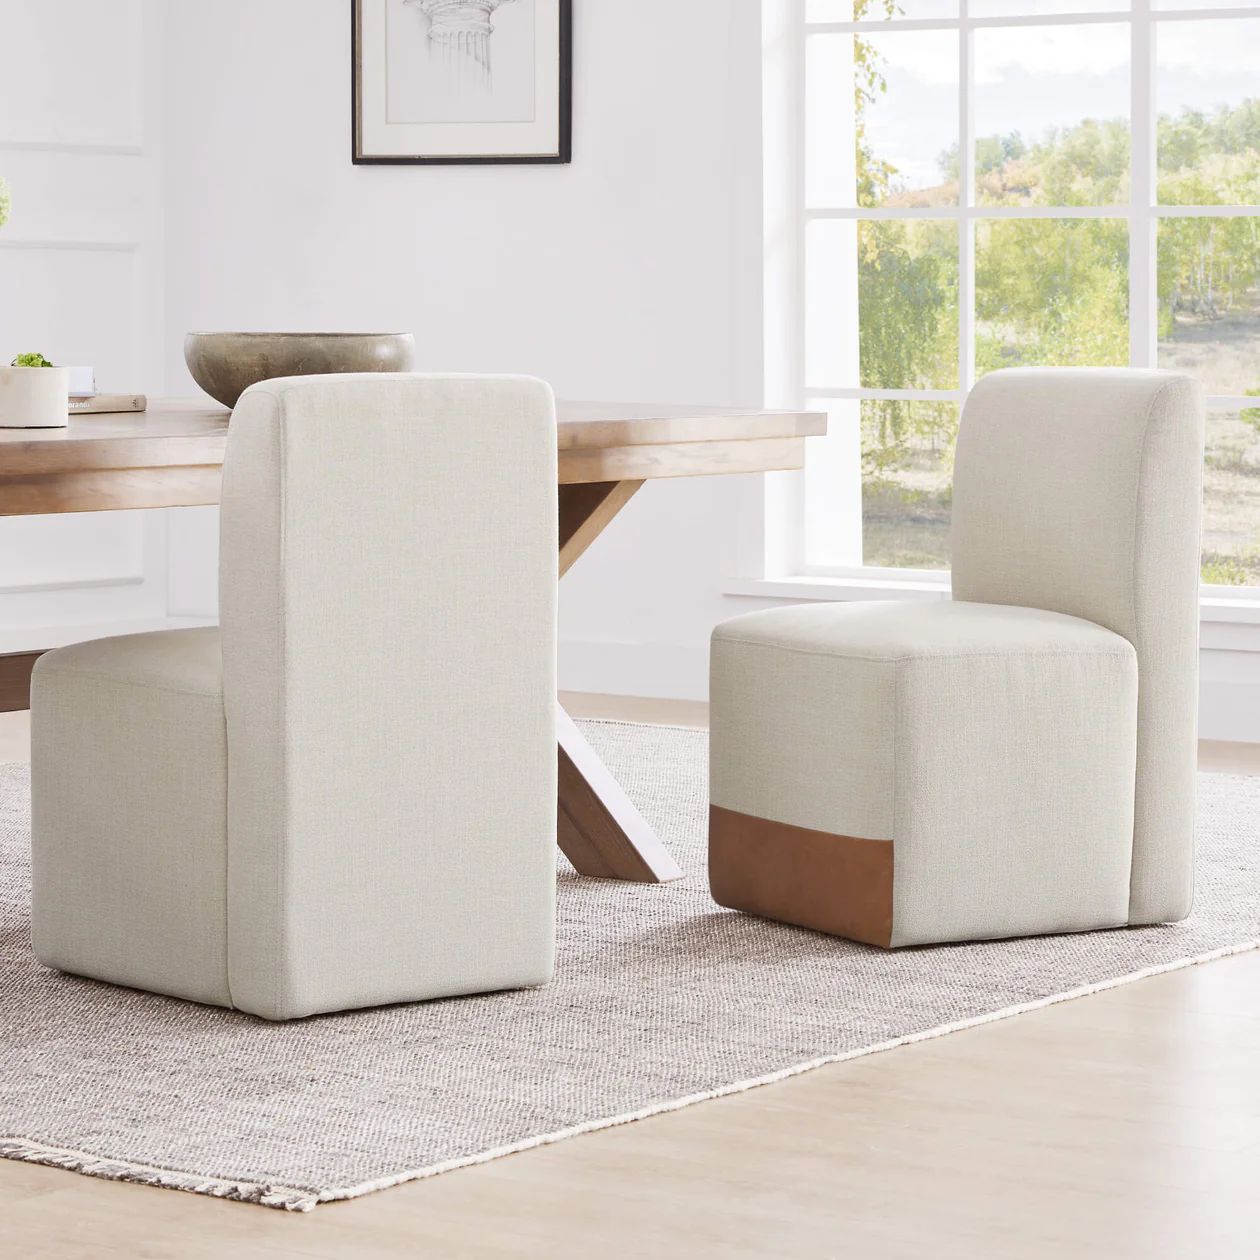 CHITA®️ Aida Performance Fabric Dining Chair With Casters Base (Set of 2) - chitaliving.com | Chita